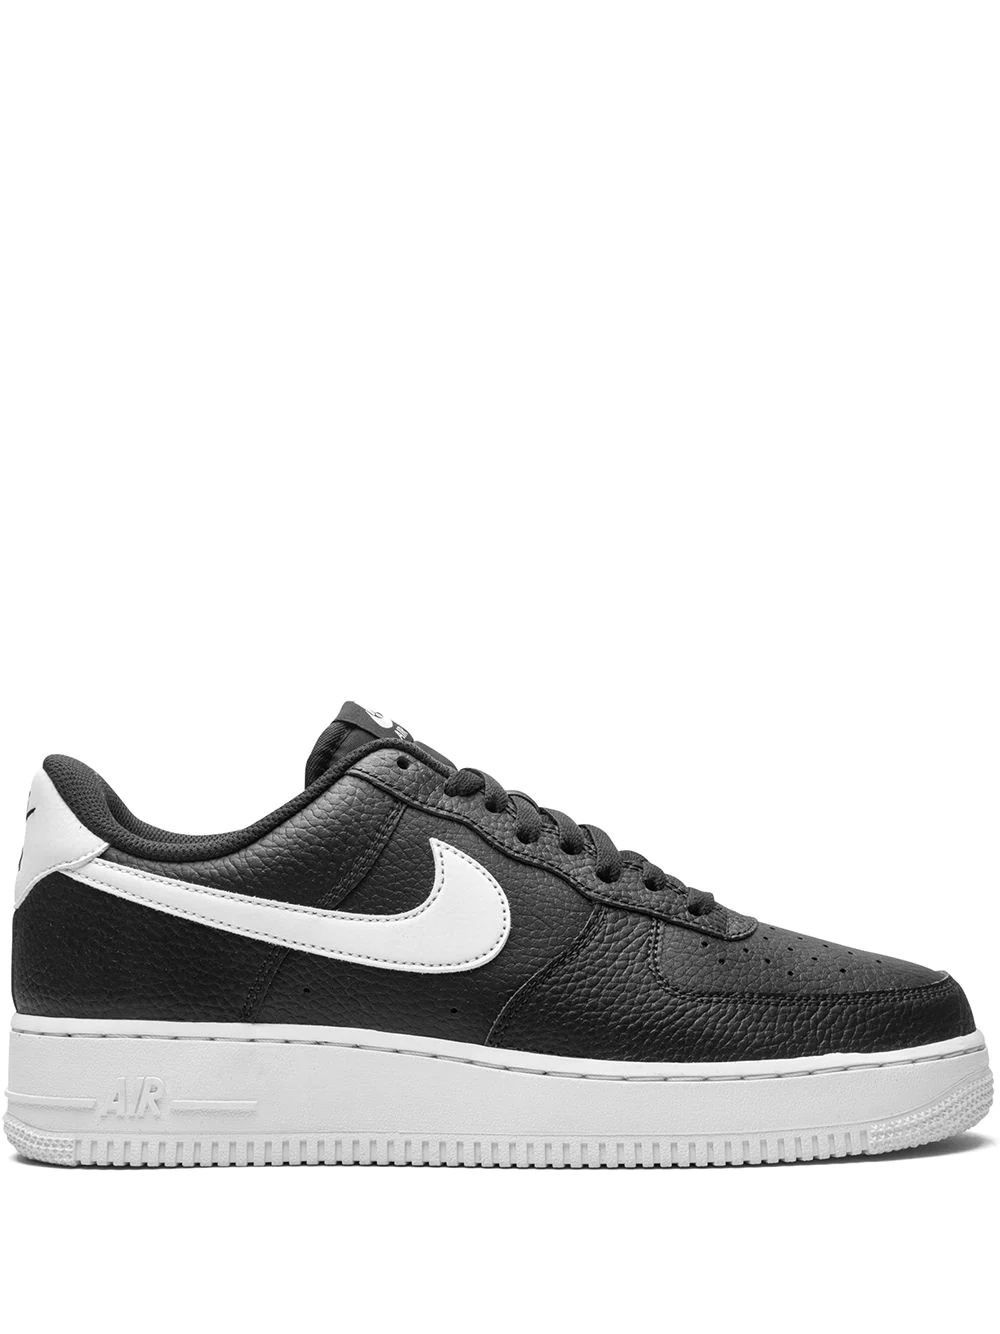 Air Force 1 Low '07 "Black/White" sneakers - 1